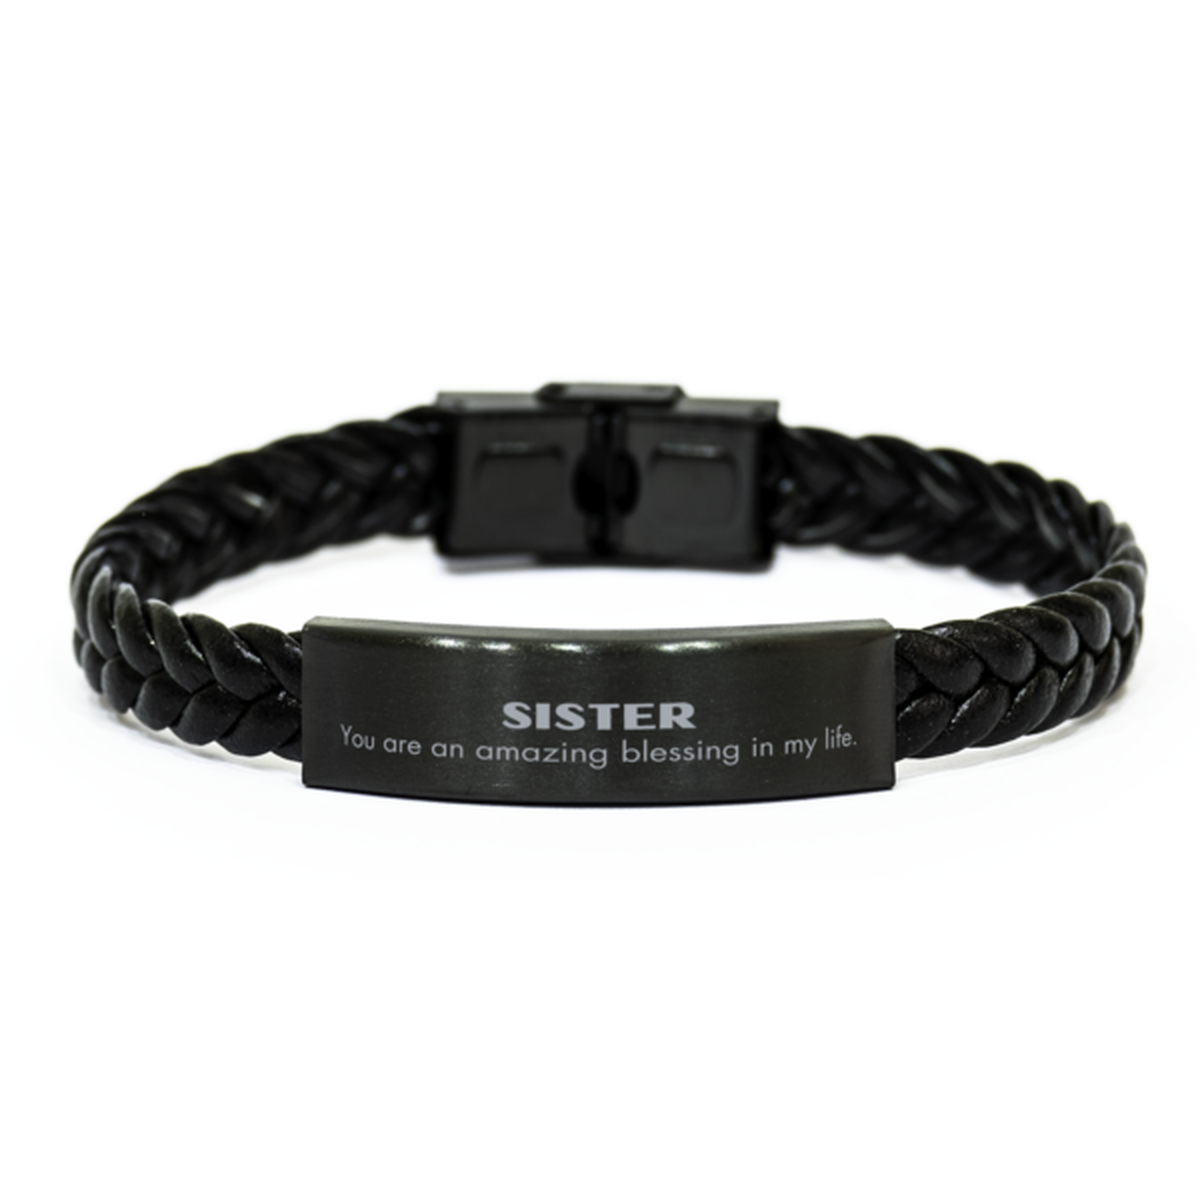 Sister Braided Leather Bracelet, You are an amazing blessing in my life, Thank You Gifts For Sister, Inspirational Birthday Christmas Unique Gifts For Sister